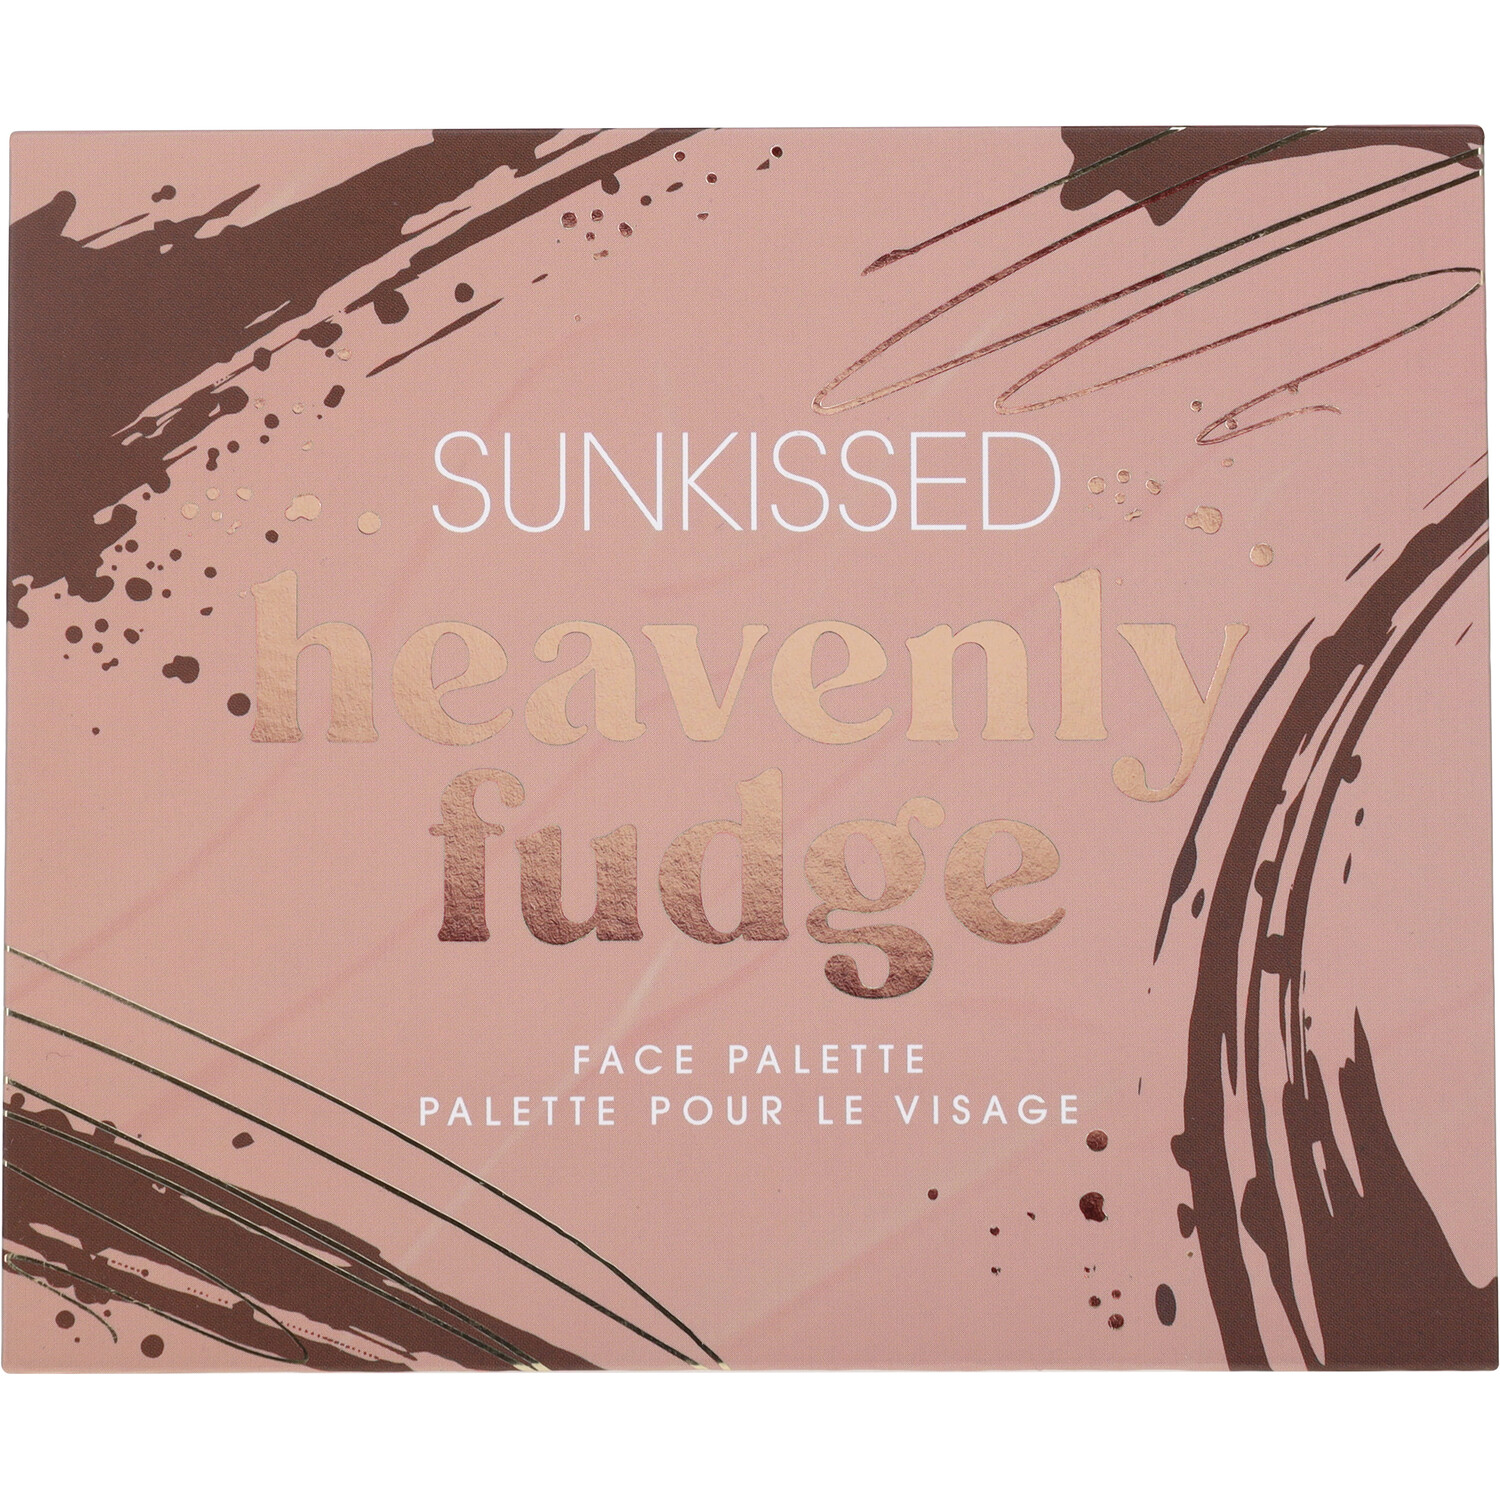 Sunkissed Heavenly Fudge Face Palette - Brown Image 1